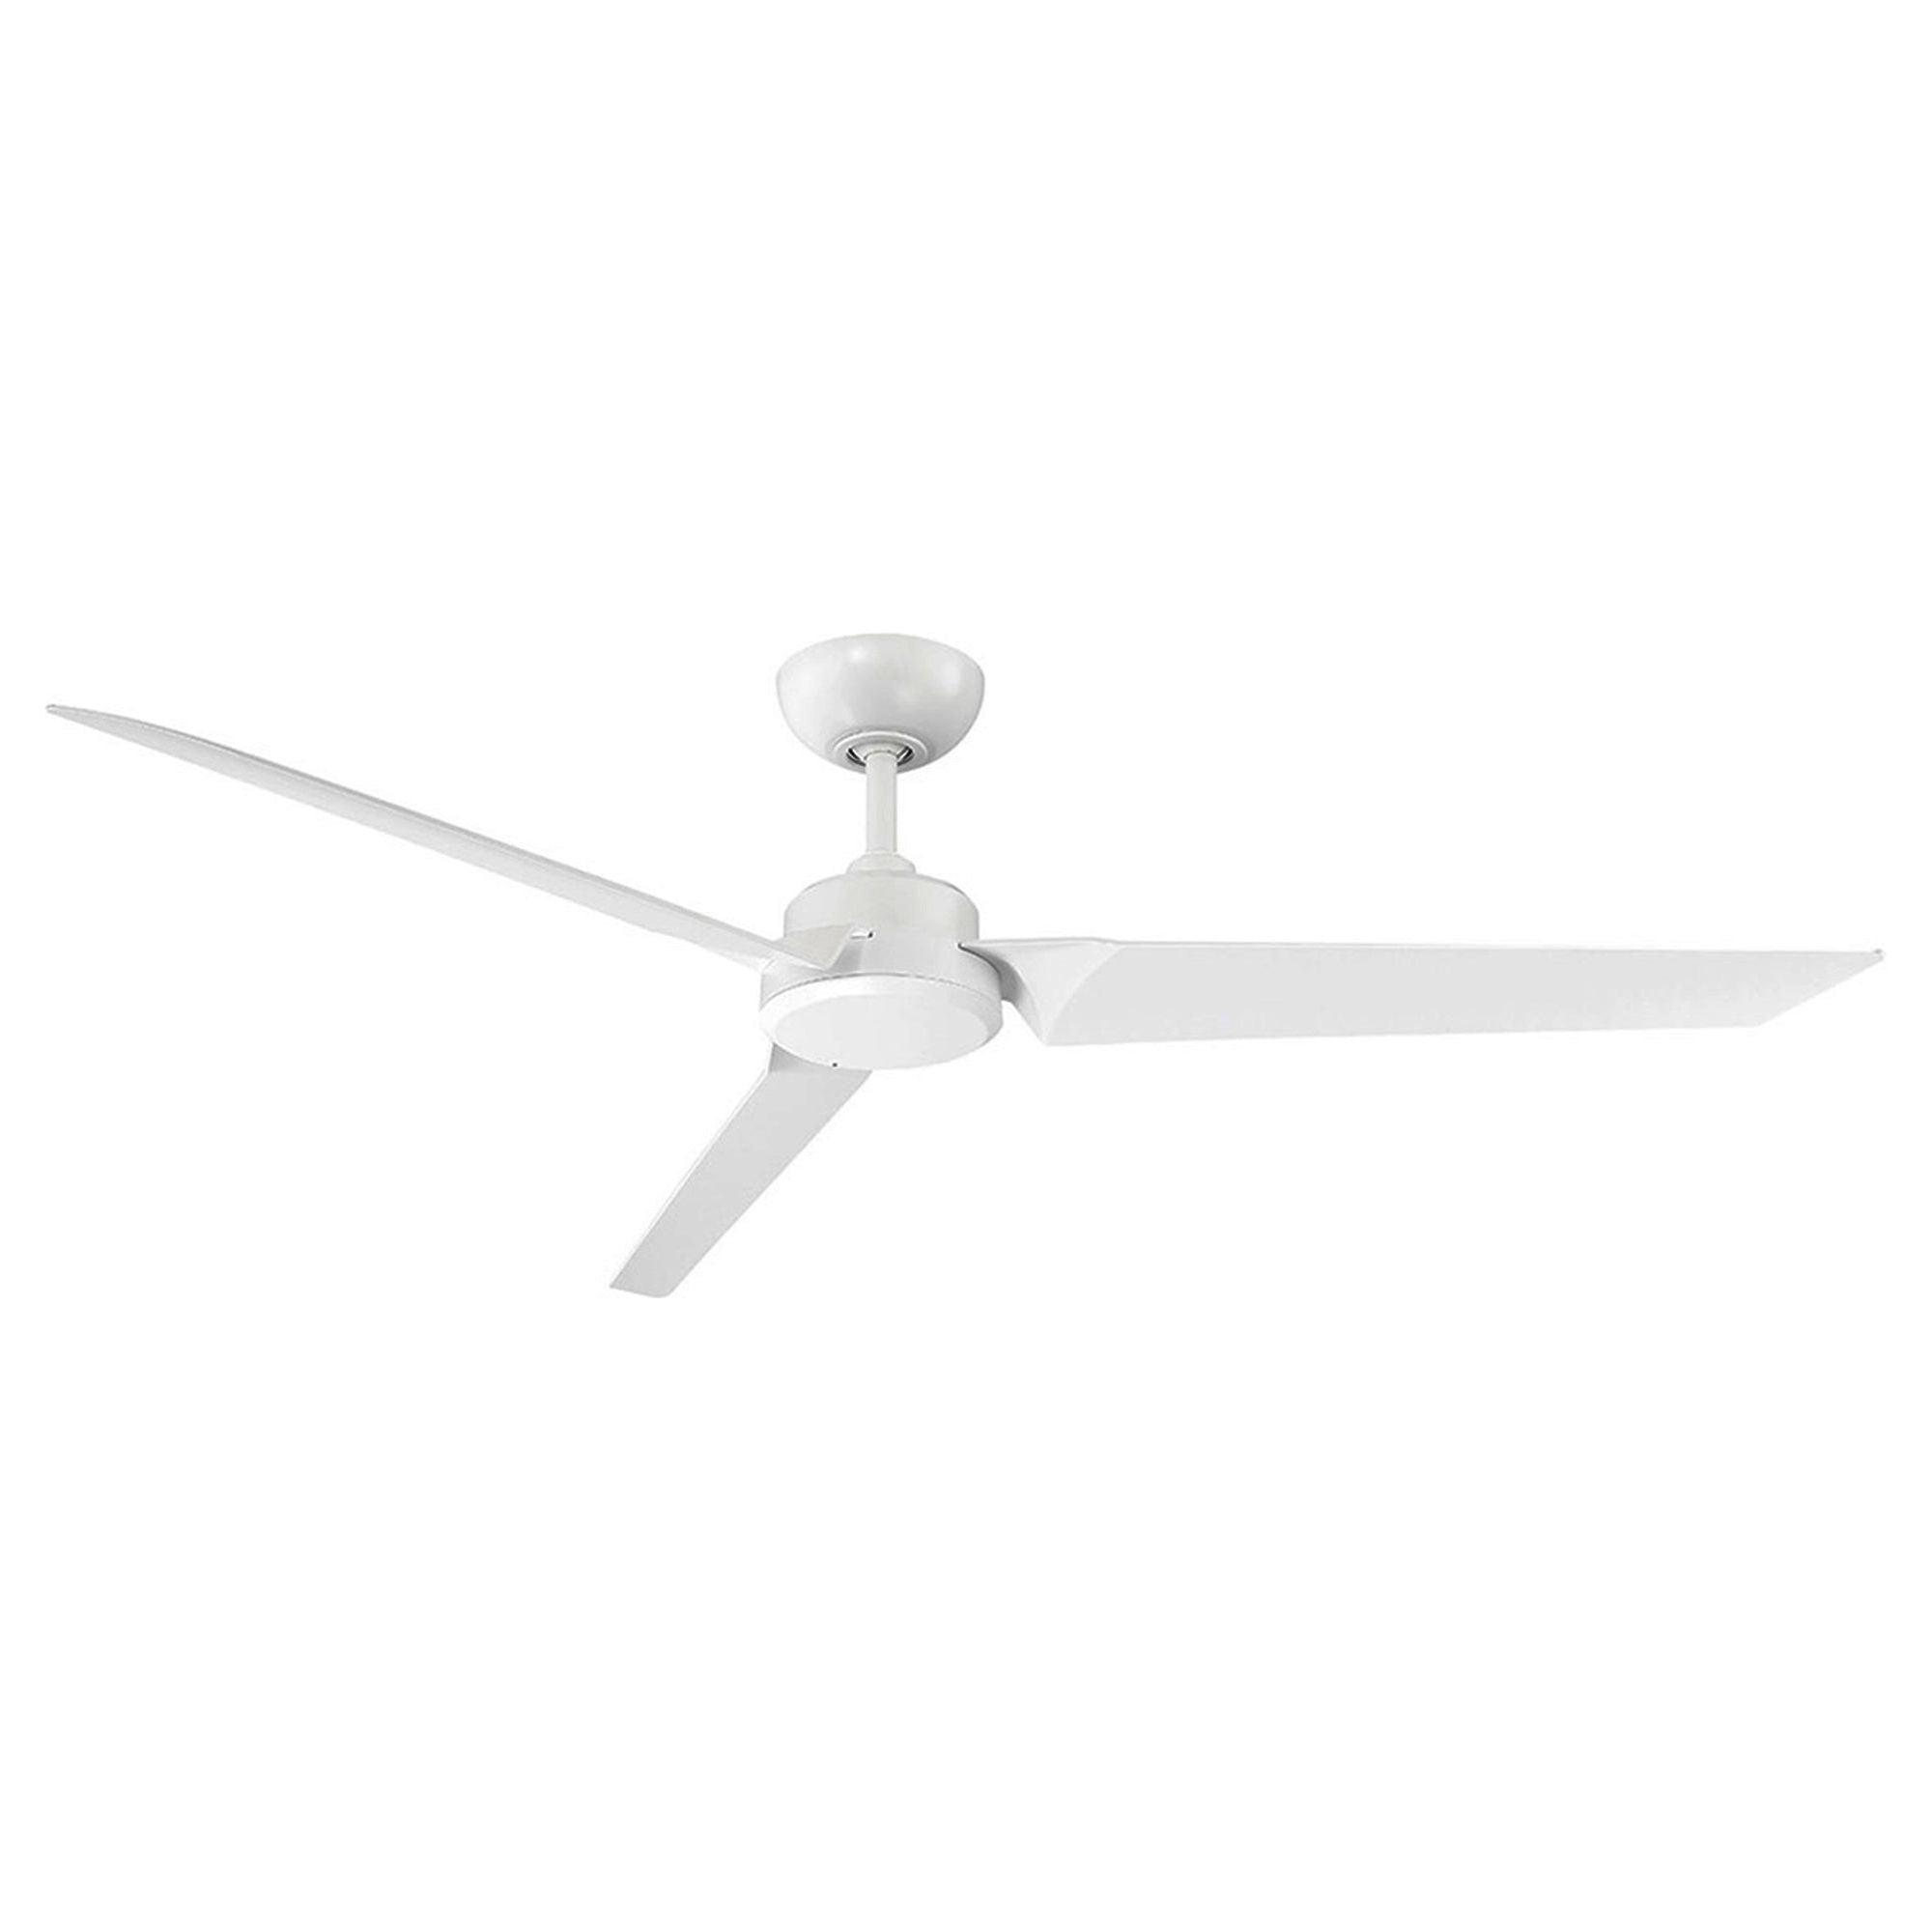 Modern Forms - Roboto Indoor/Outdoor 3-Blade 62" Smart Ceiling Fan with Remote Control - Lights Canada